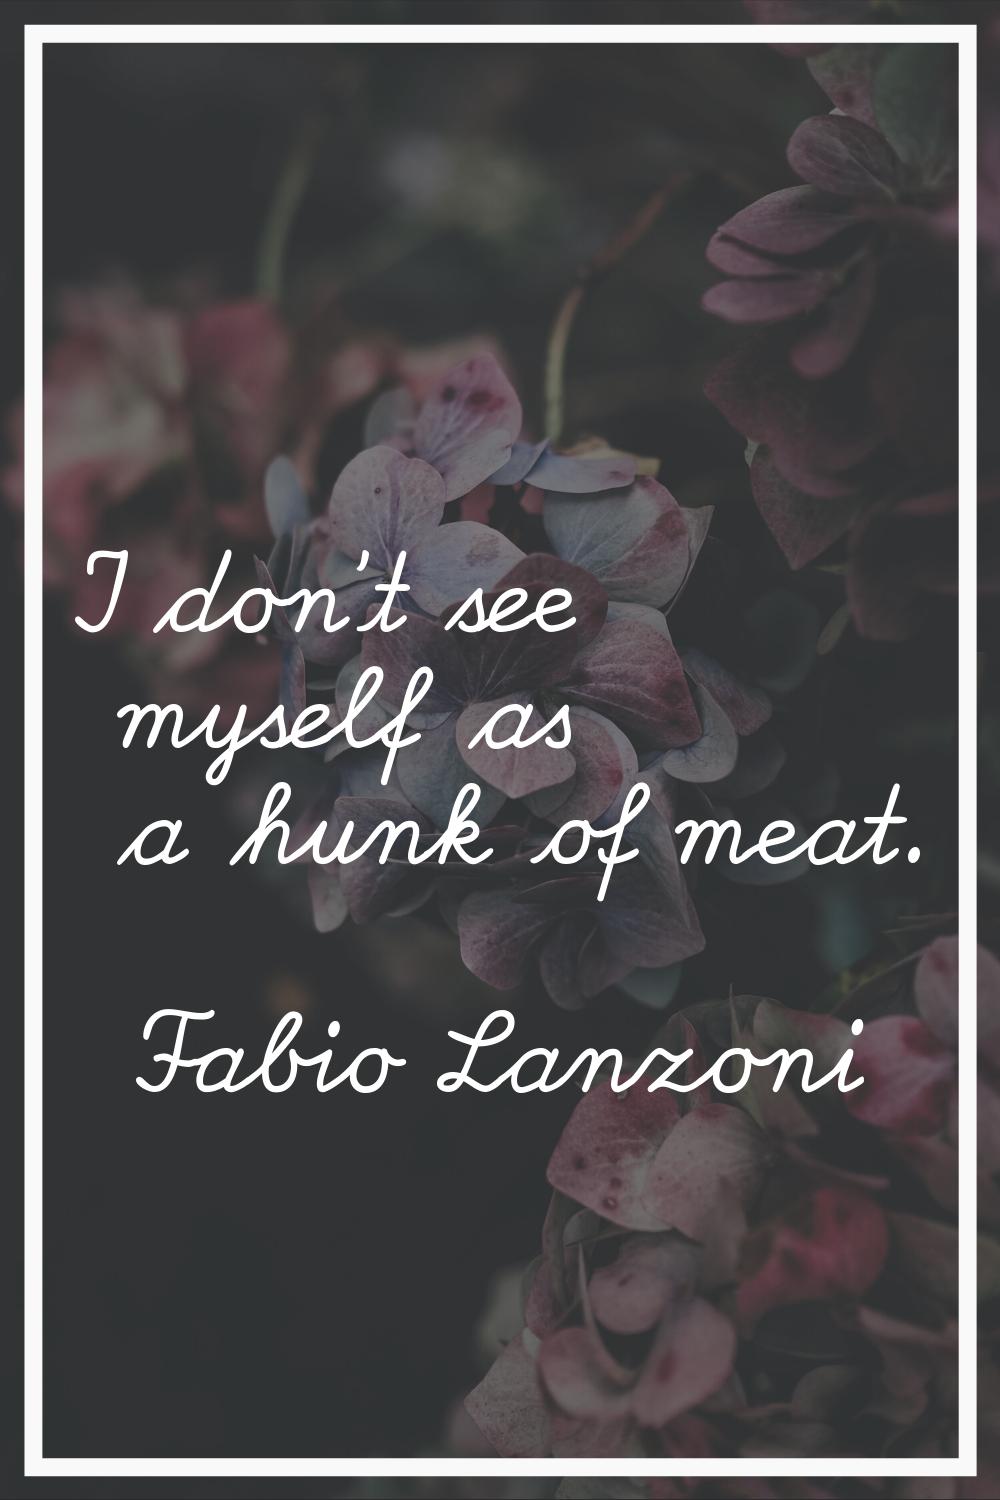 I don't see myself as a hunk of meat.